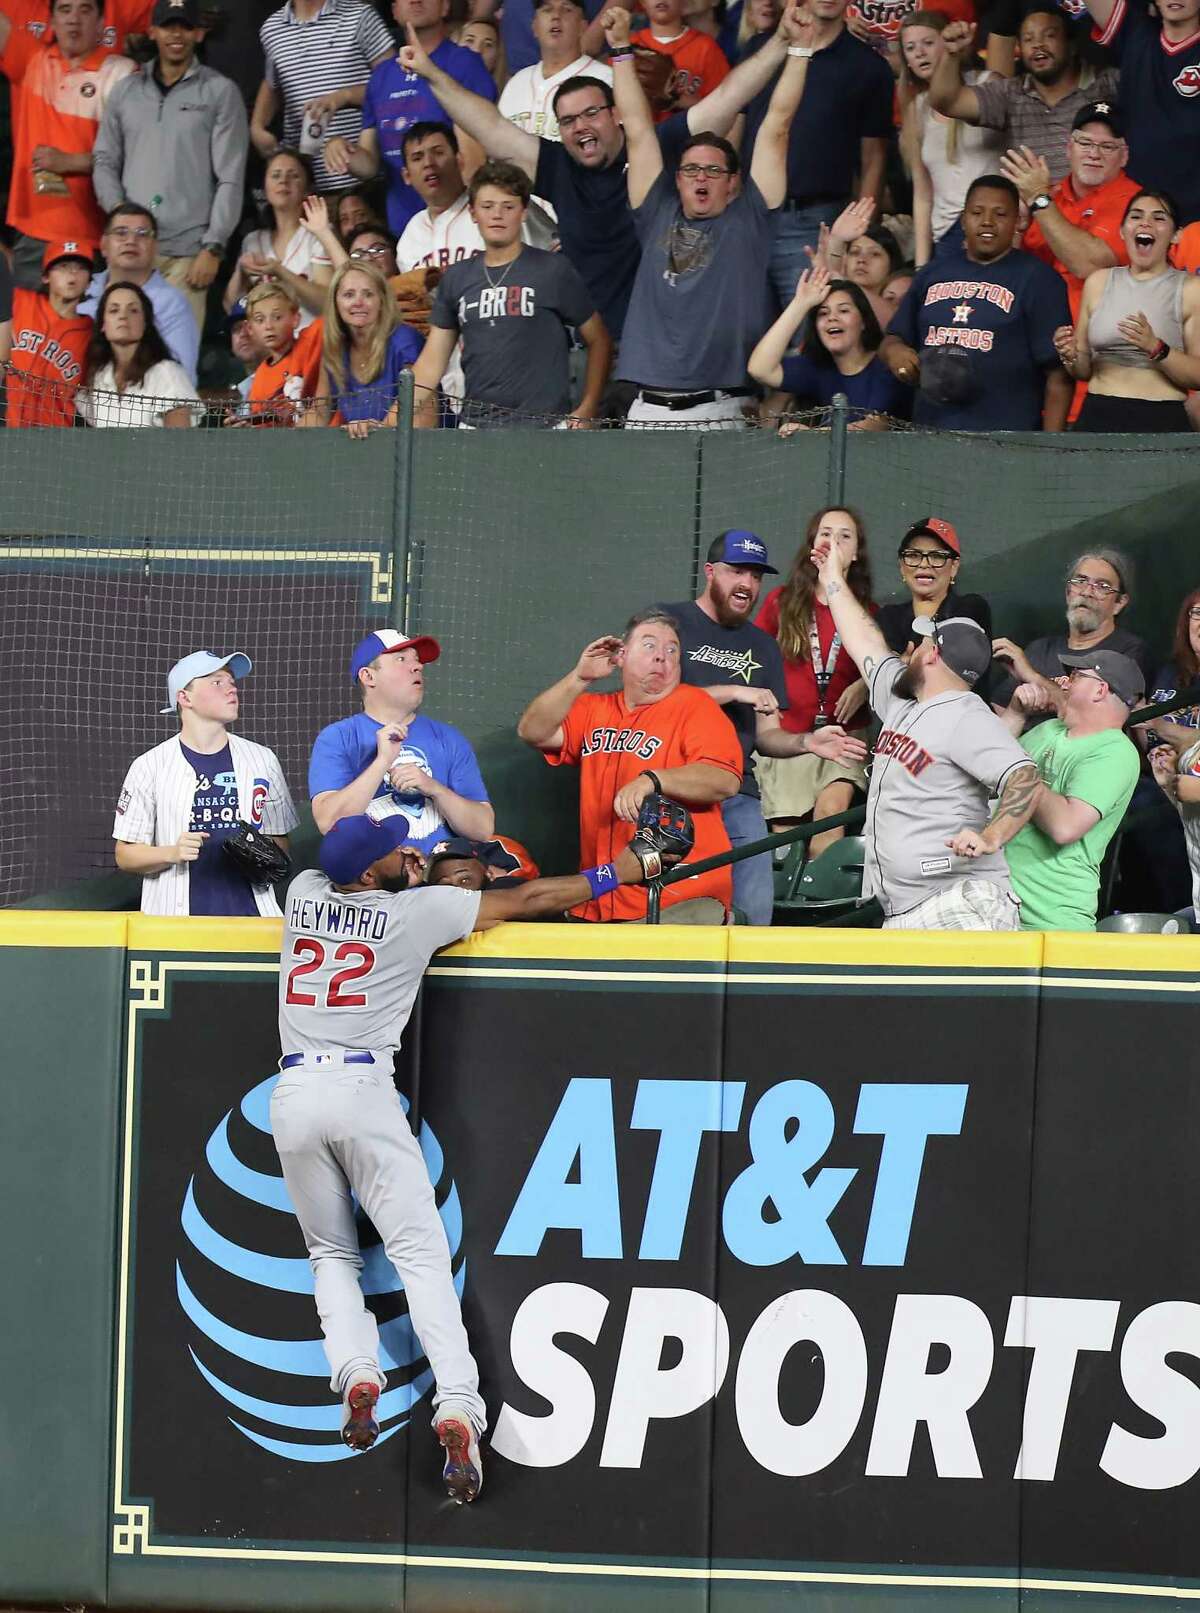 Chicago Cubs right fielder Jason Heyward (22) could reach Houston Astros third baseman Alex Bregman (2) homer during the 6th-inning of an MLB baseball game at Minute Maid Park Tuesday, May 28, 2019, in Houston.